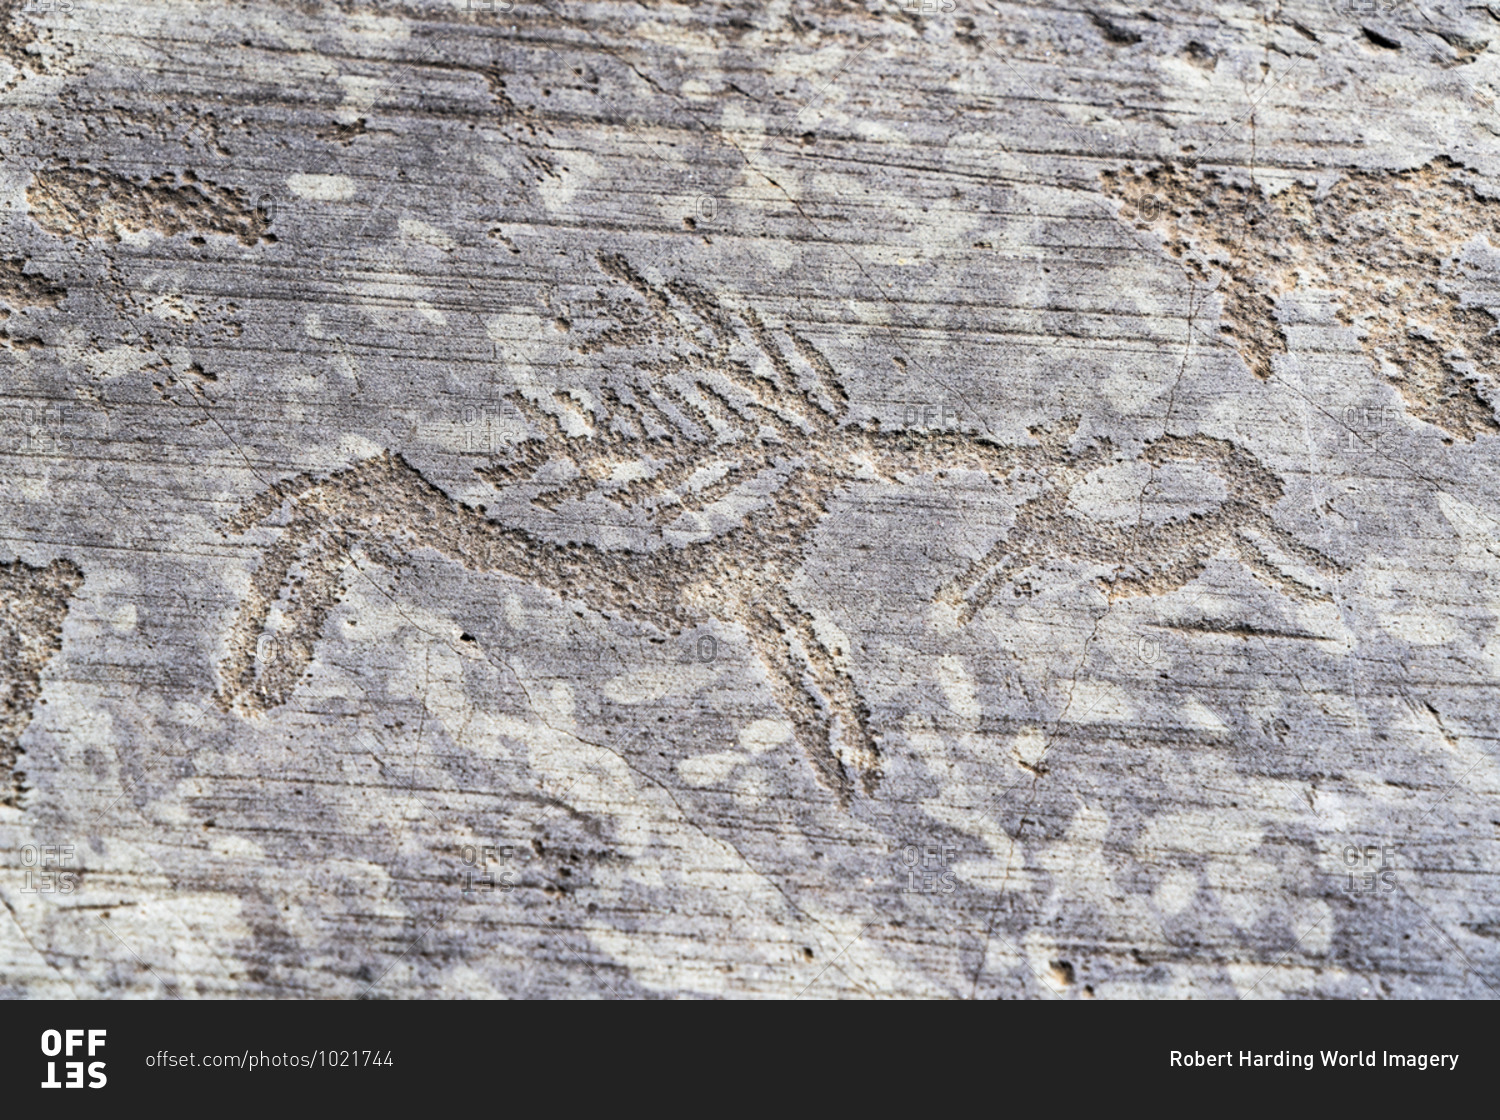 Detail of deer, rock engraving, Naquane National Park, Capo di Ponte, Valcamonica (Val Camonica), Brescia province, Lombardy, Italy, Europe